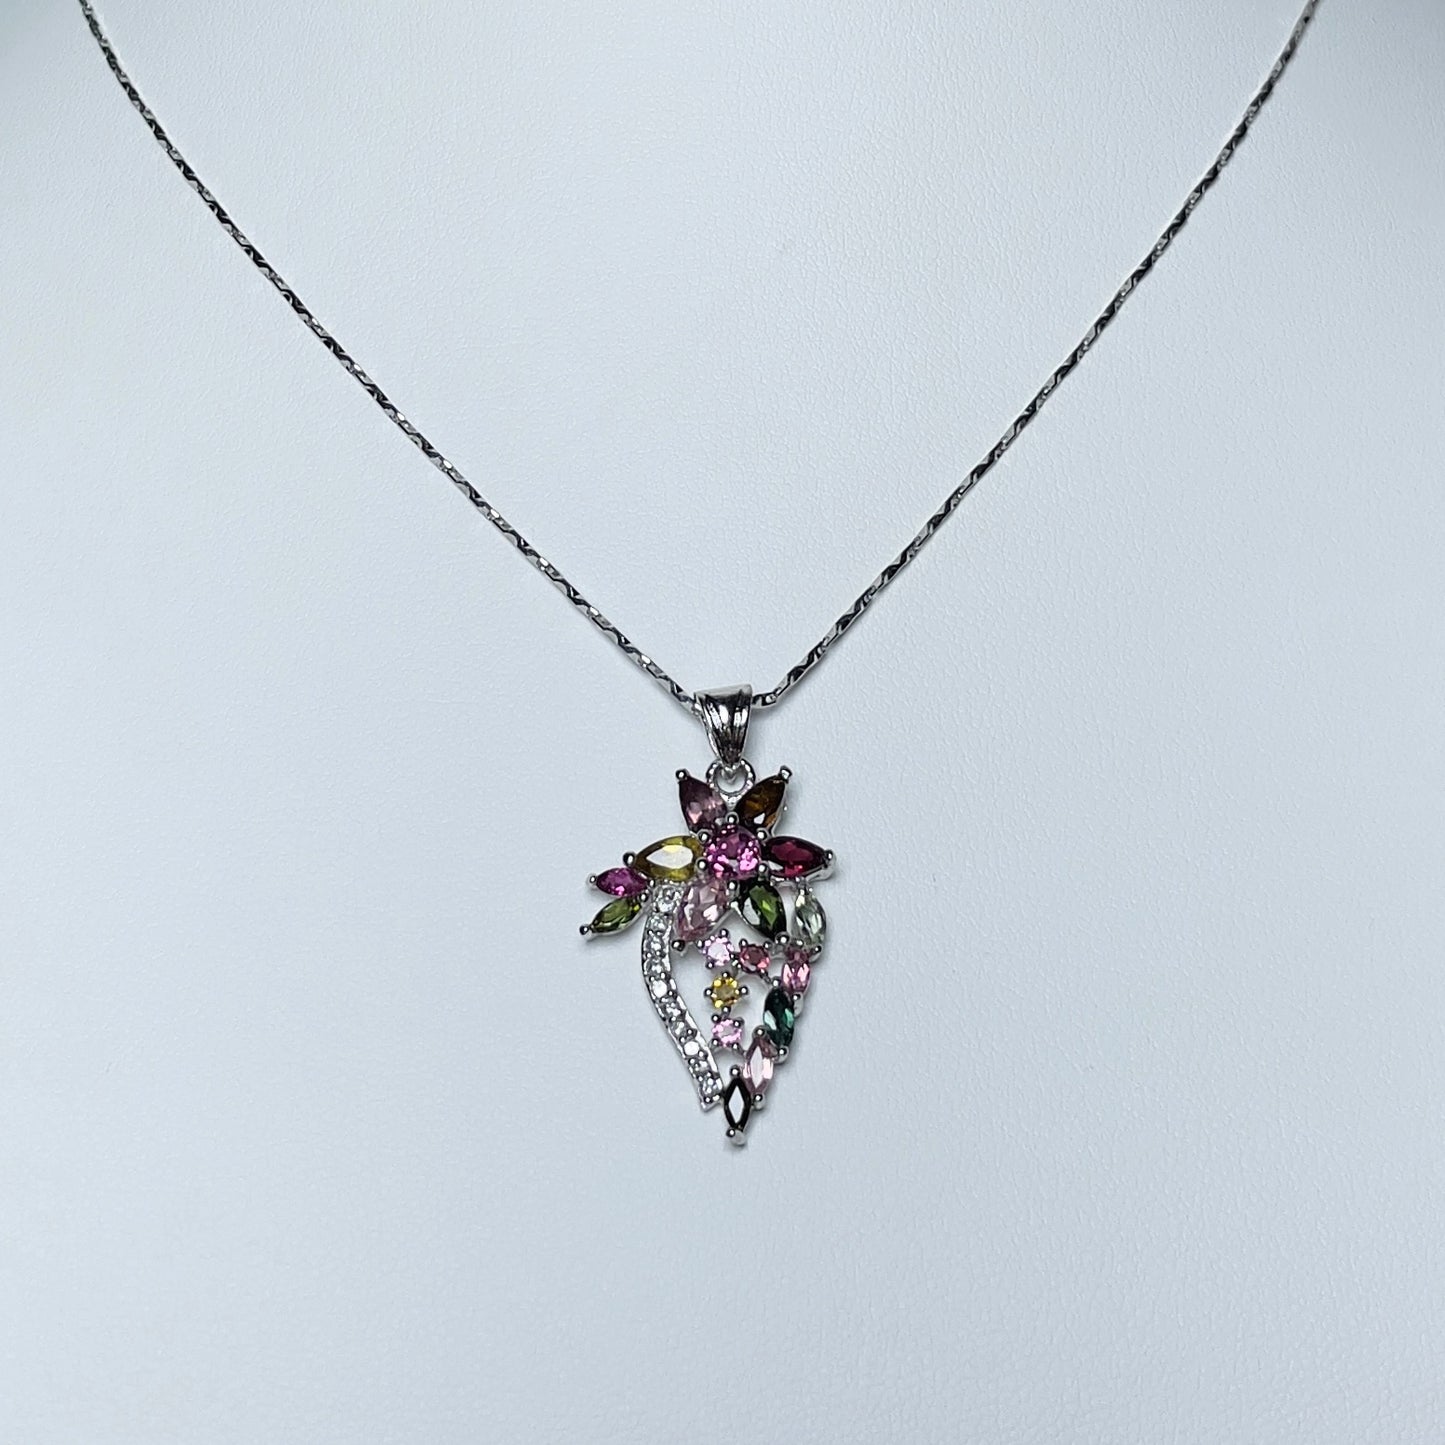 Stonelry Elegant Tourmaline and Zircon Flower Pendant on S925 Sterling Silver Chain Necklace